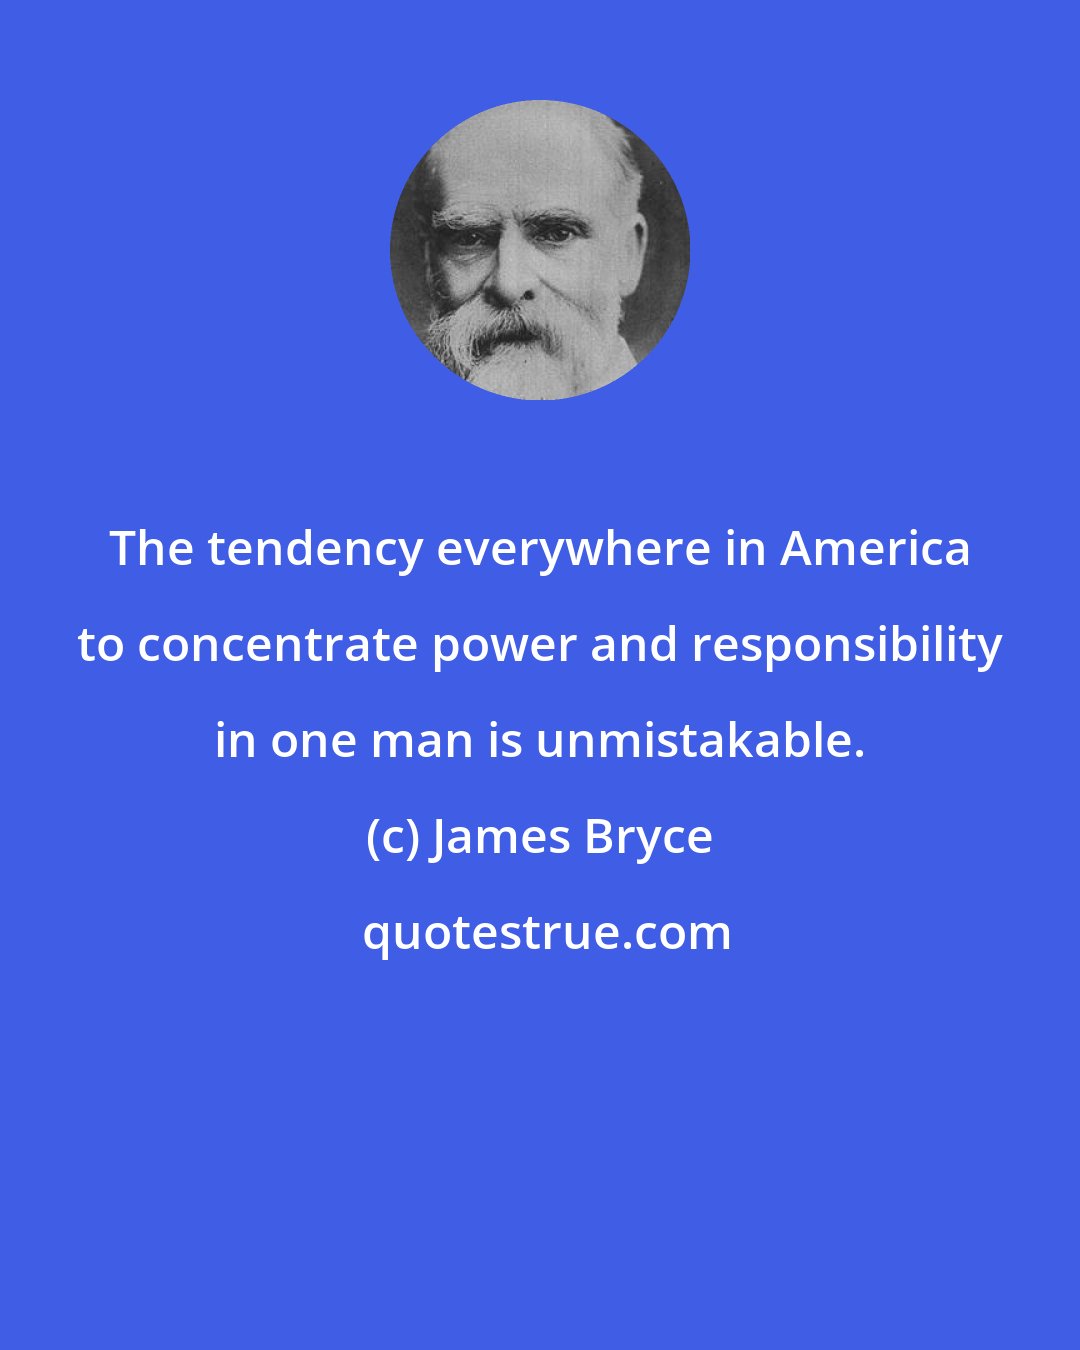 James Bryce: The tendency everywhere in America to concentrate power and responsibility in one man is unmistakable.